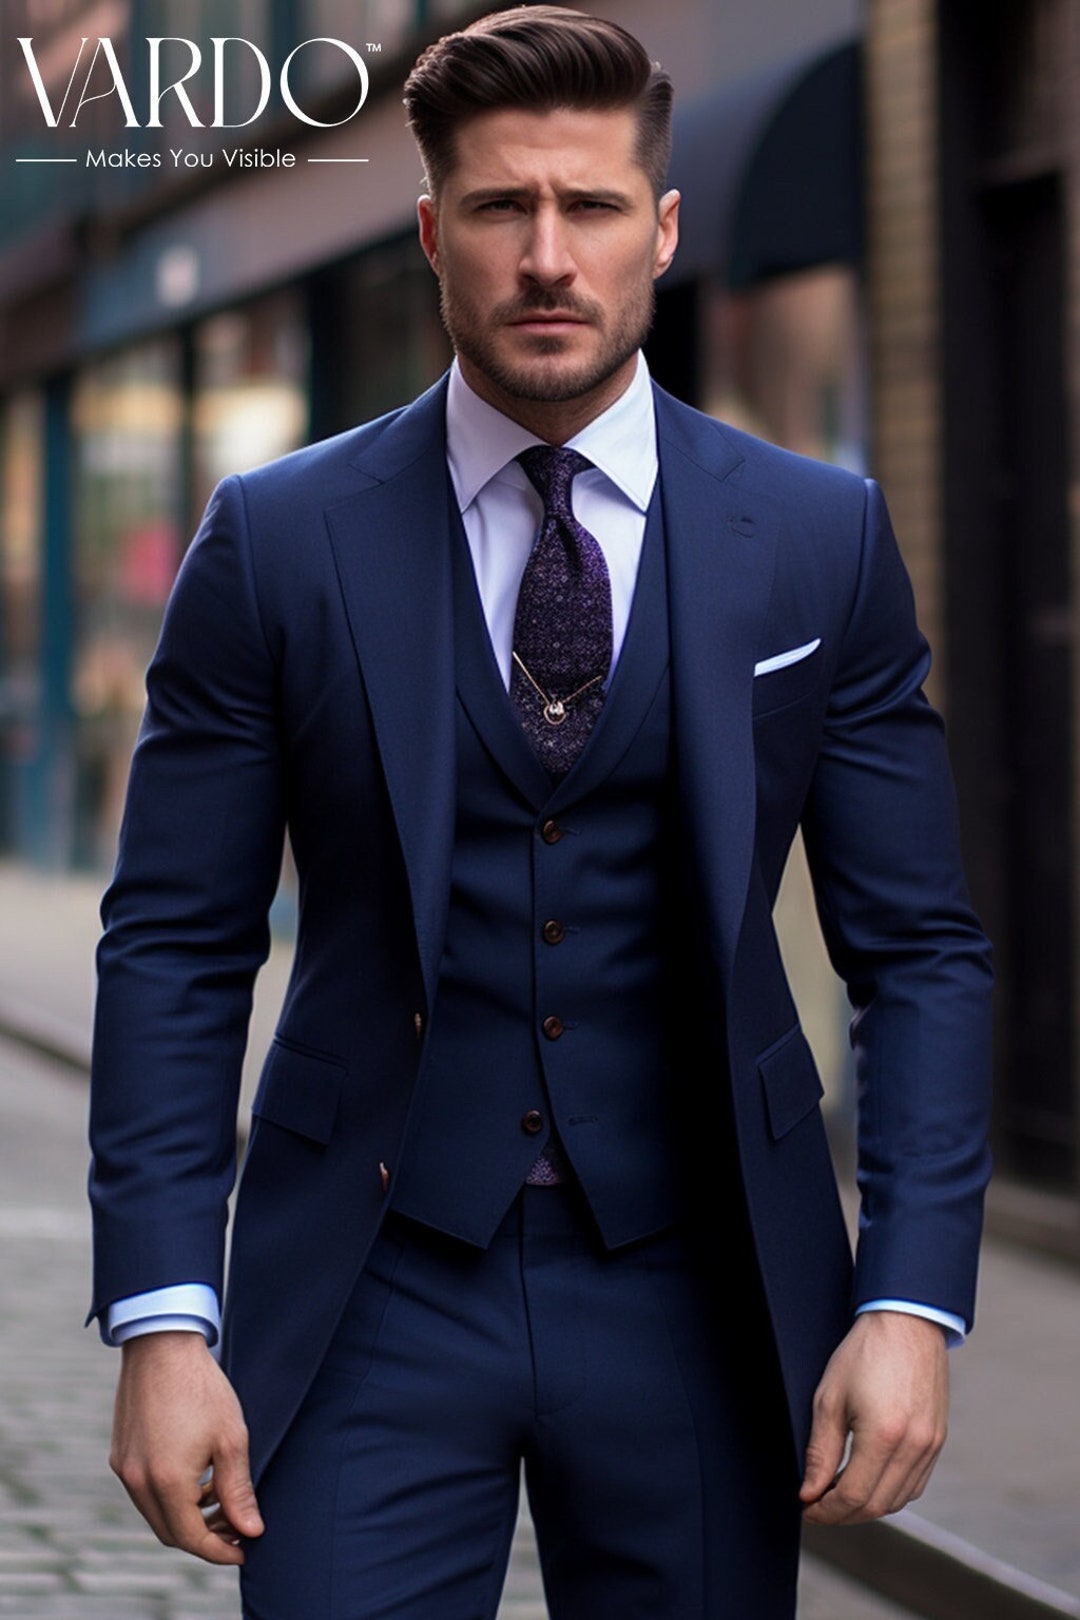 Navy Blue Three-piece Suit for Men Formal Event Attire for Every ...